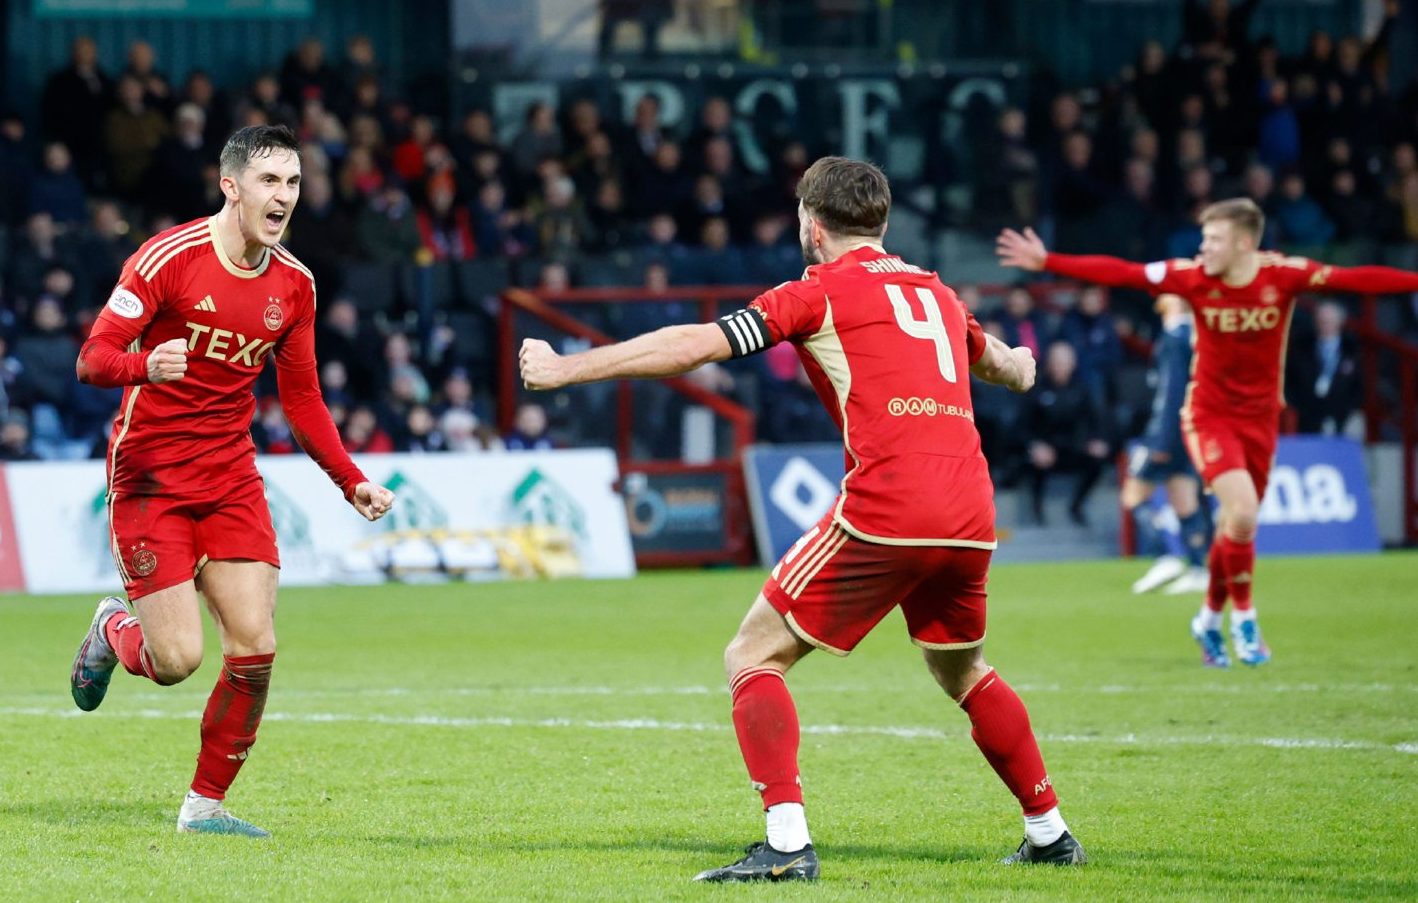 Jamie McGrath (7) of Aberdeen celebrates scoring to make it 1-0 against Ross County in Dingwall. Image: Shutterstock